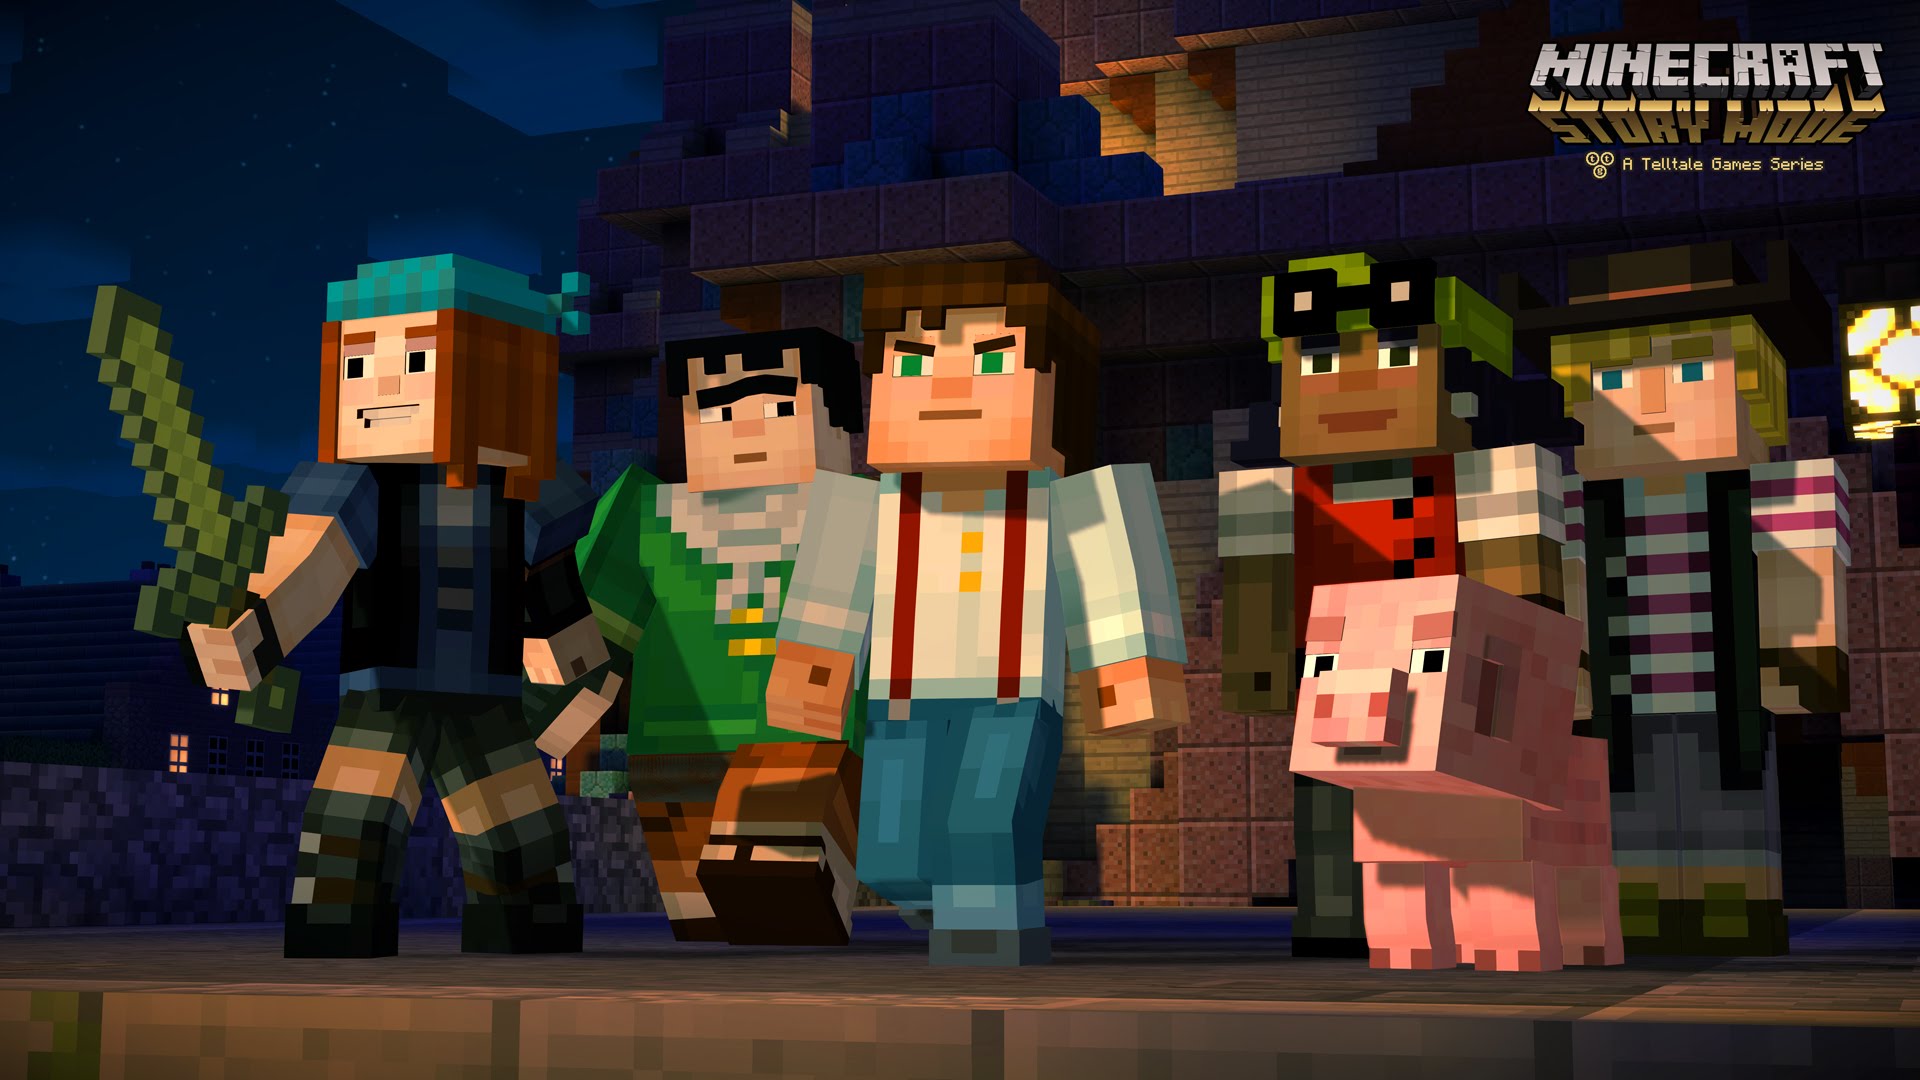 This is what the Minecraft: Story Mode situation looks like. :  r/PiratedGames